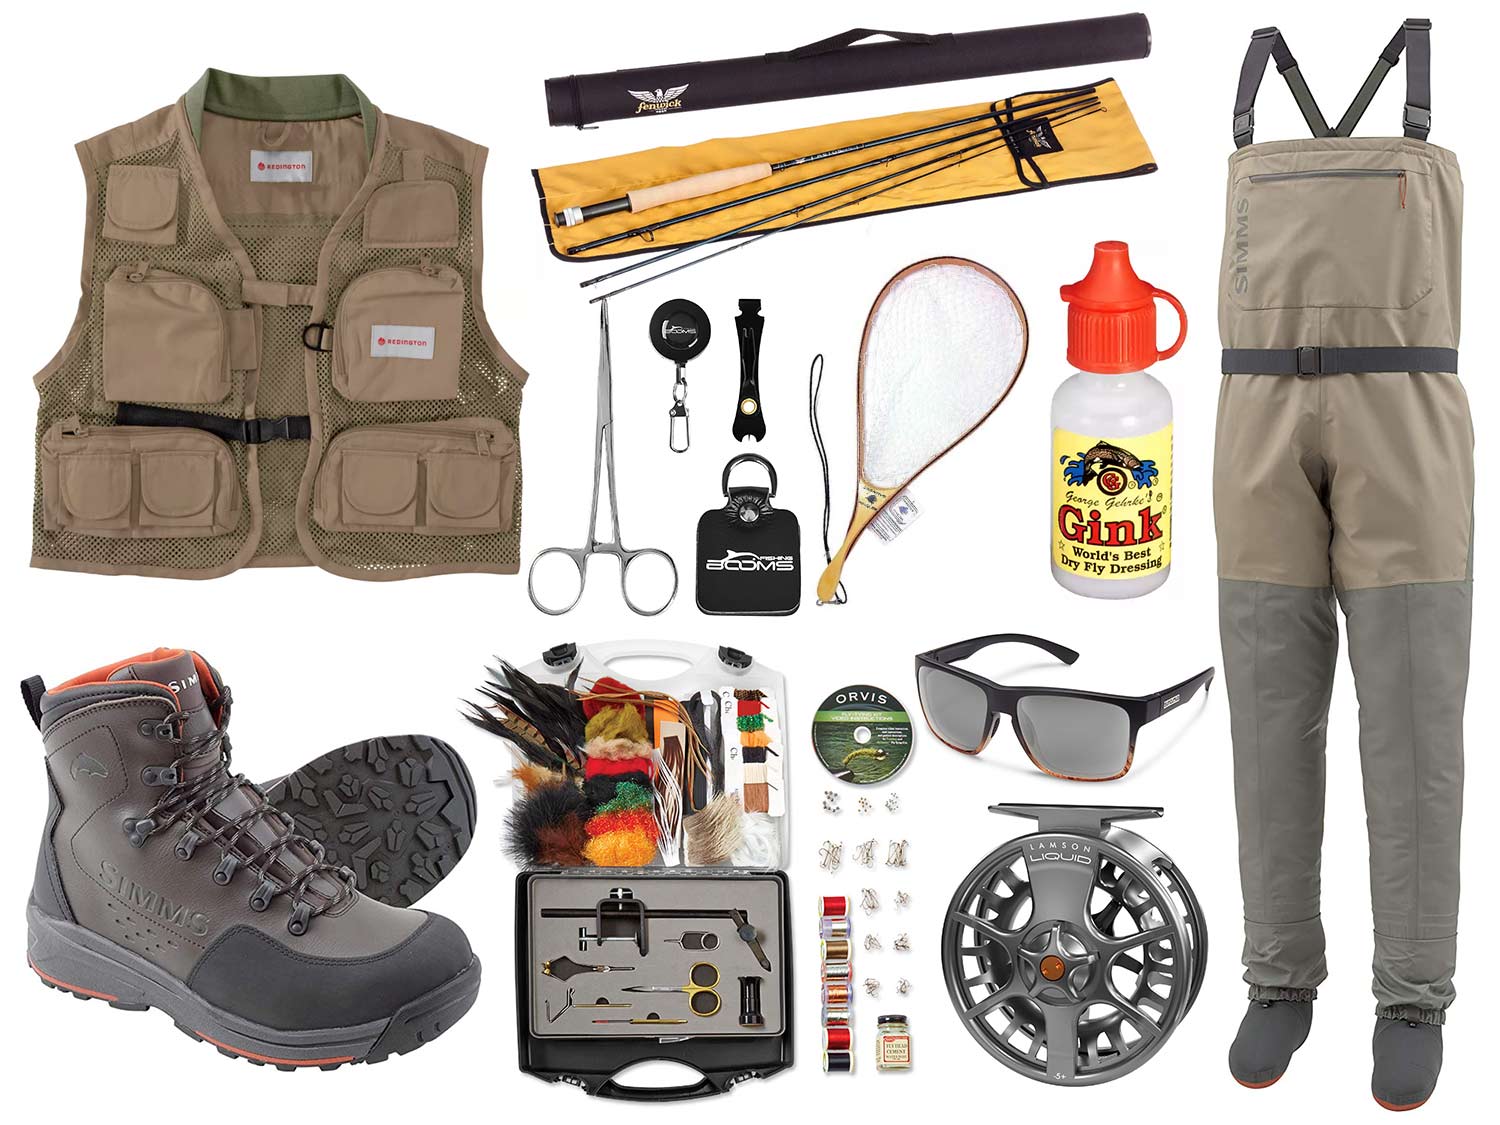 Fly Fishing Gear For Beginners: 12 Essential Items - Fly Fishing Fix